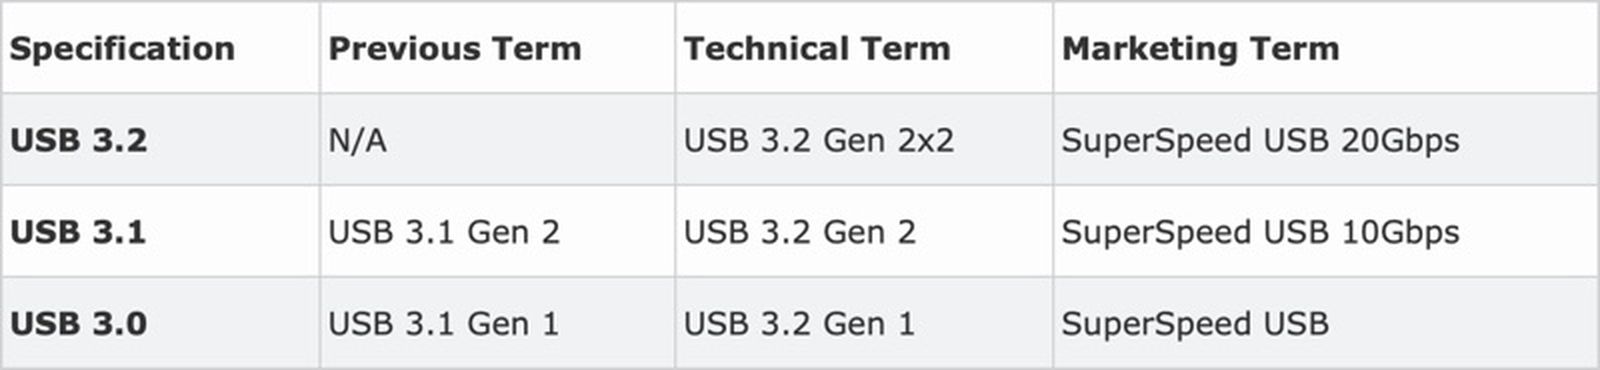 USB-IF Confusingly Merges USB 3.0 and USB 3.1 Under New USB 3.2 Branding MacRumors